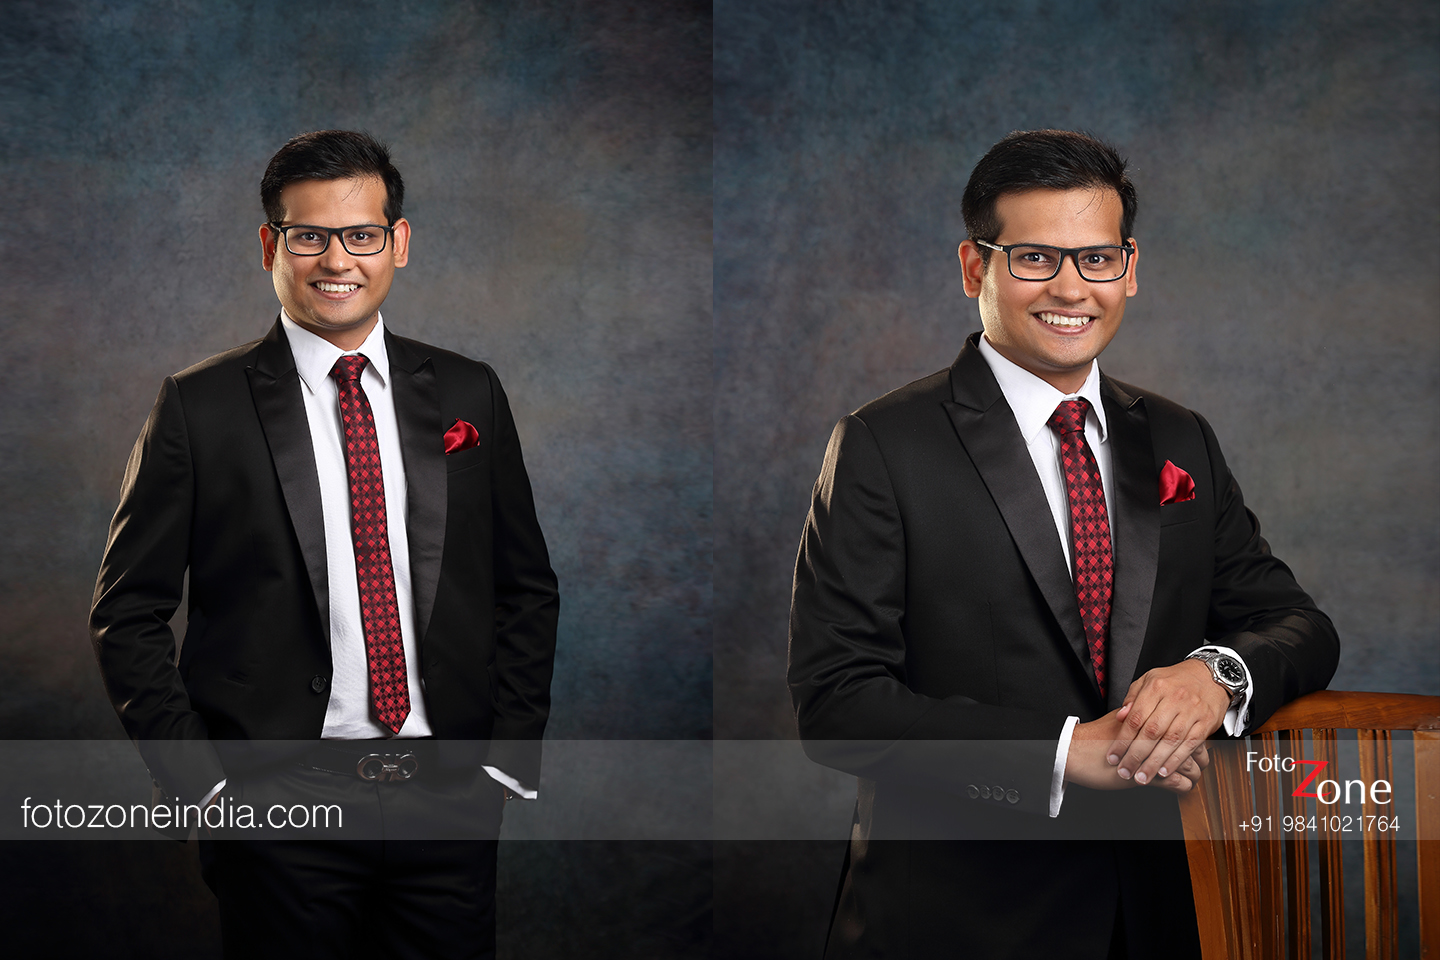 Top 10 Professional Headshot Examples With Photos & Tips | Flytographer